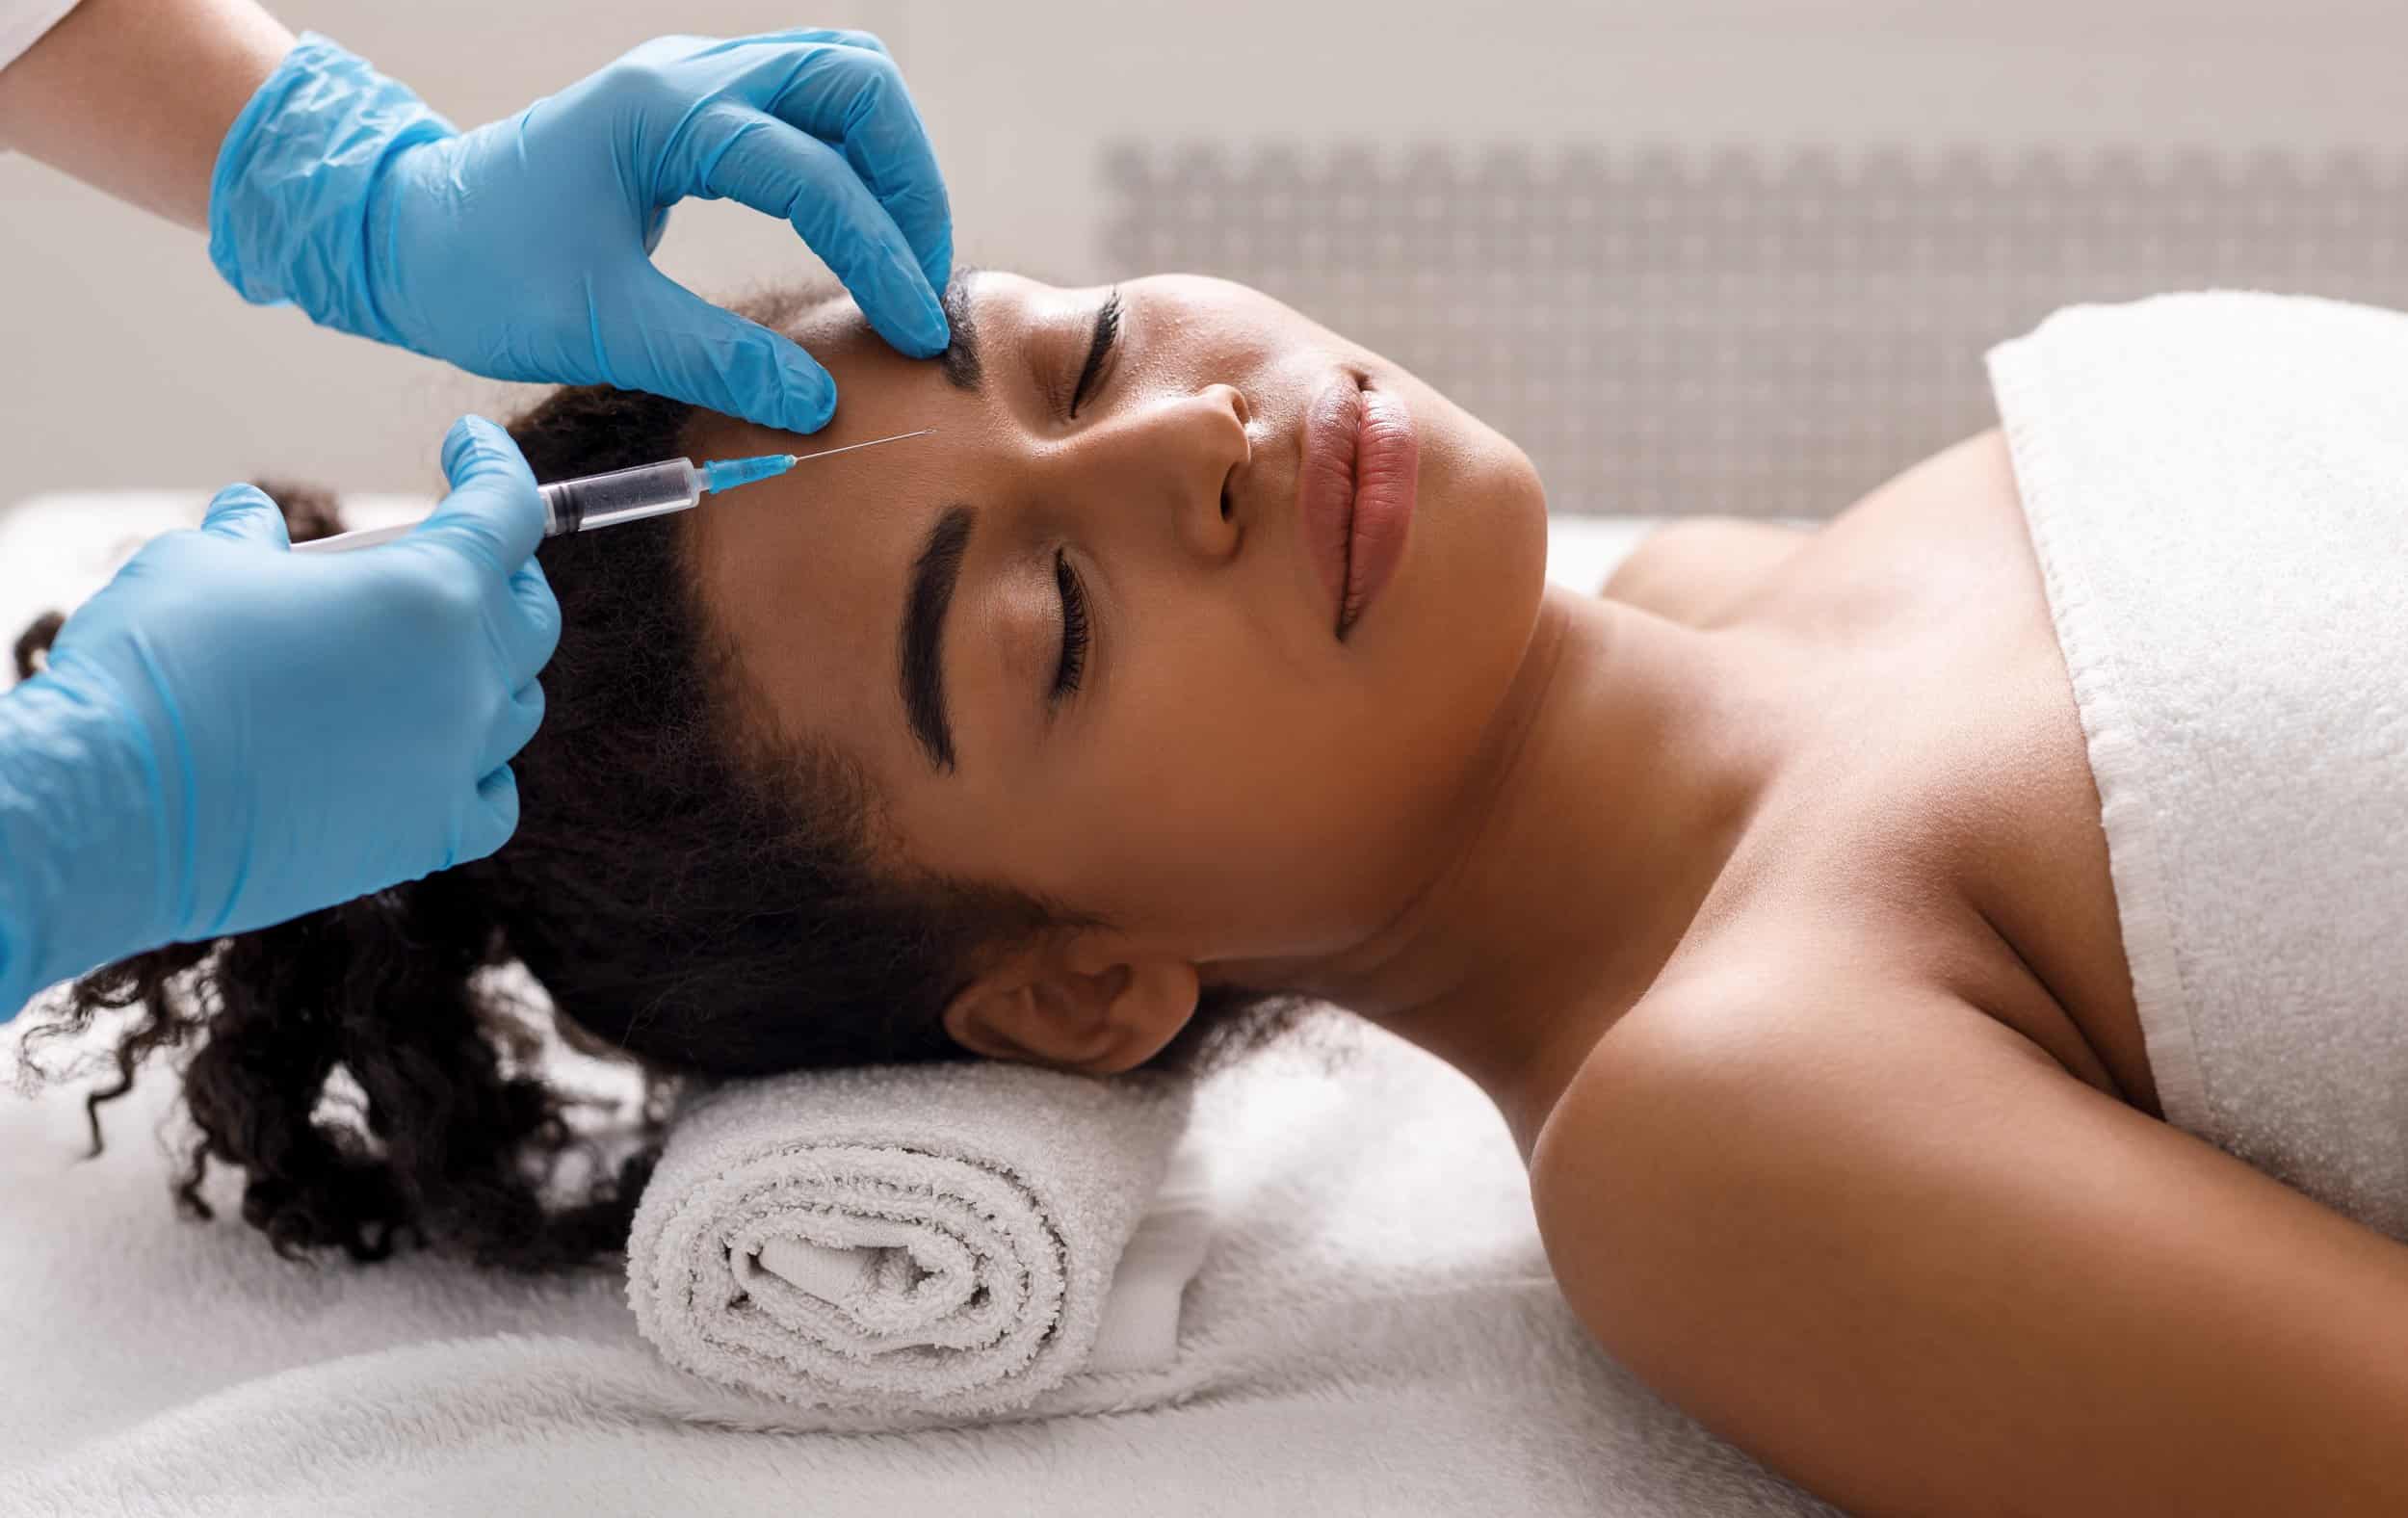 Black woman getting beauty injection at spa